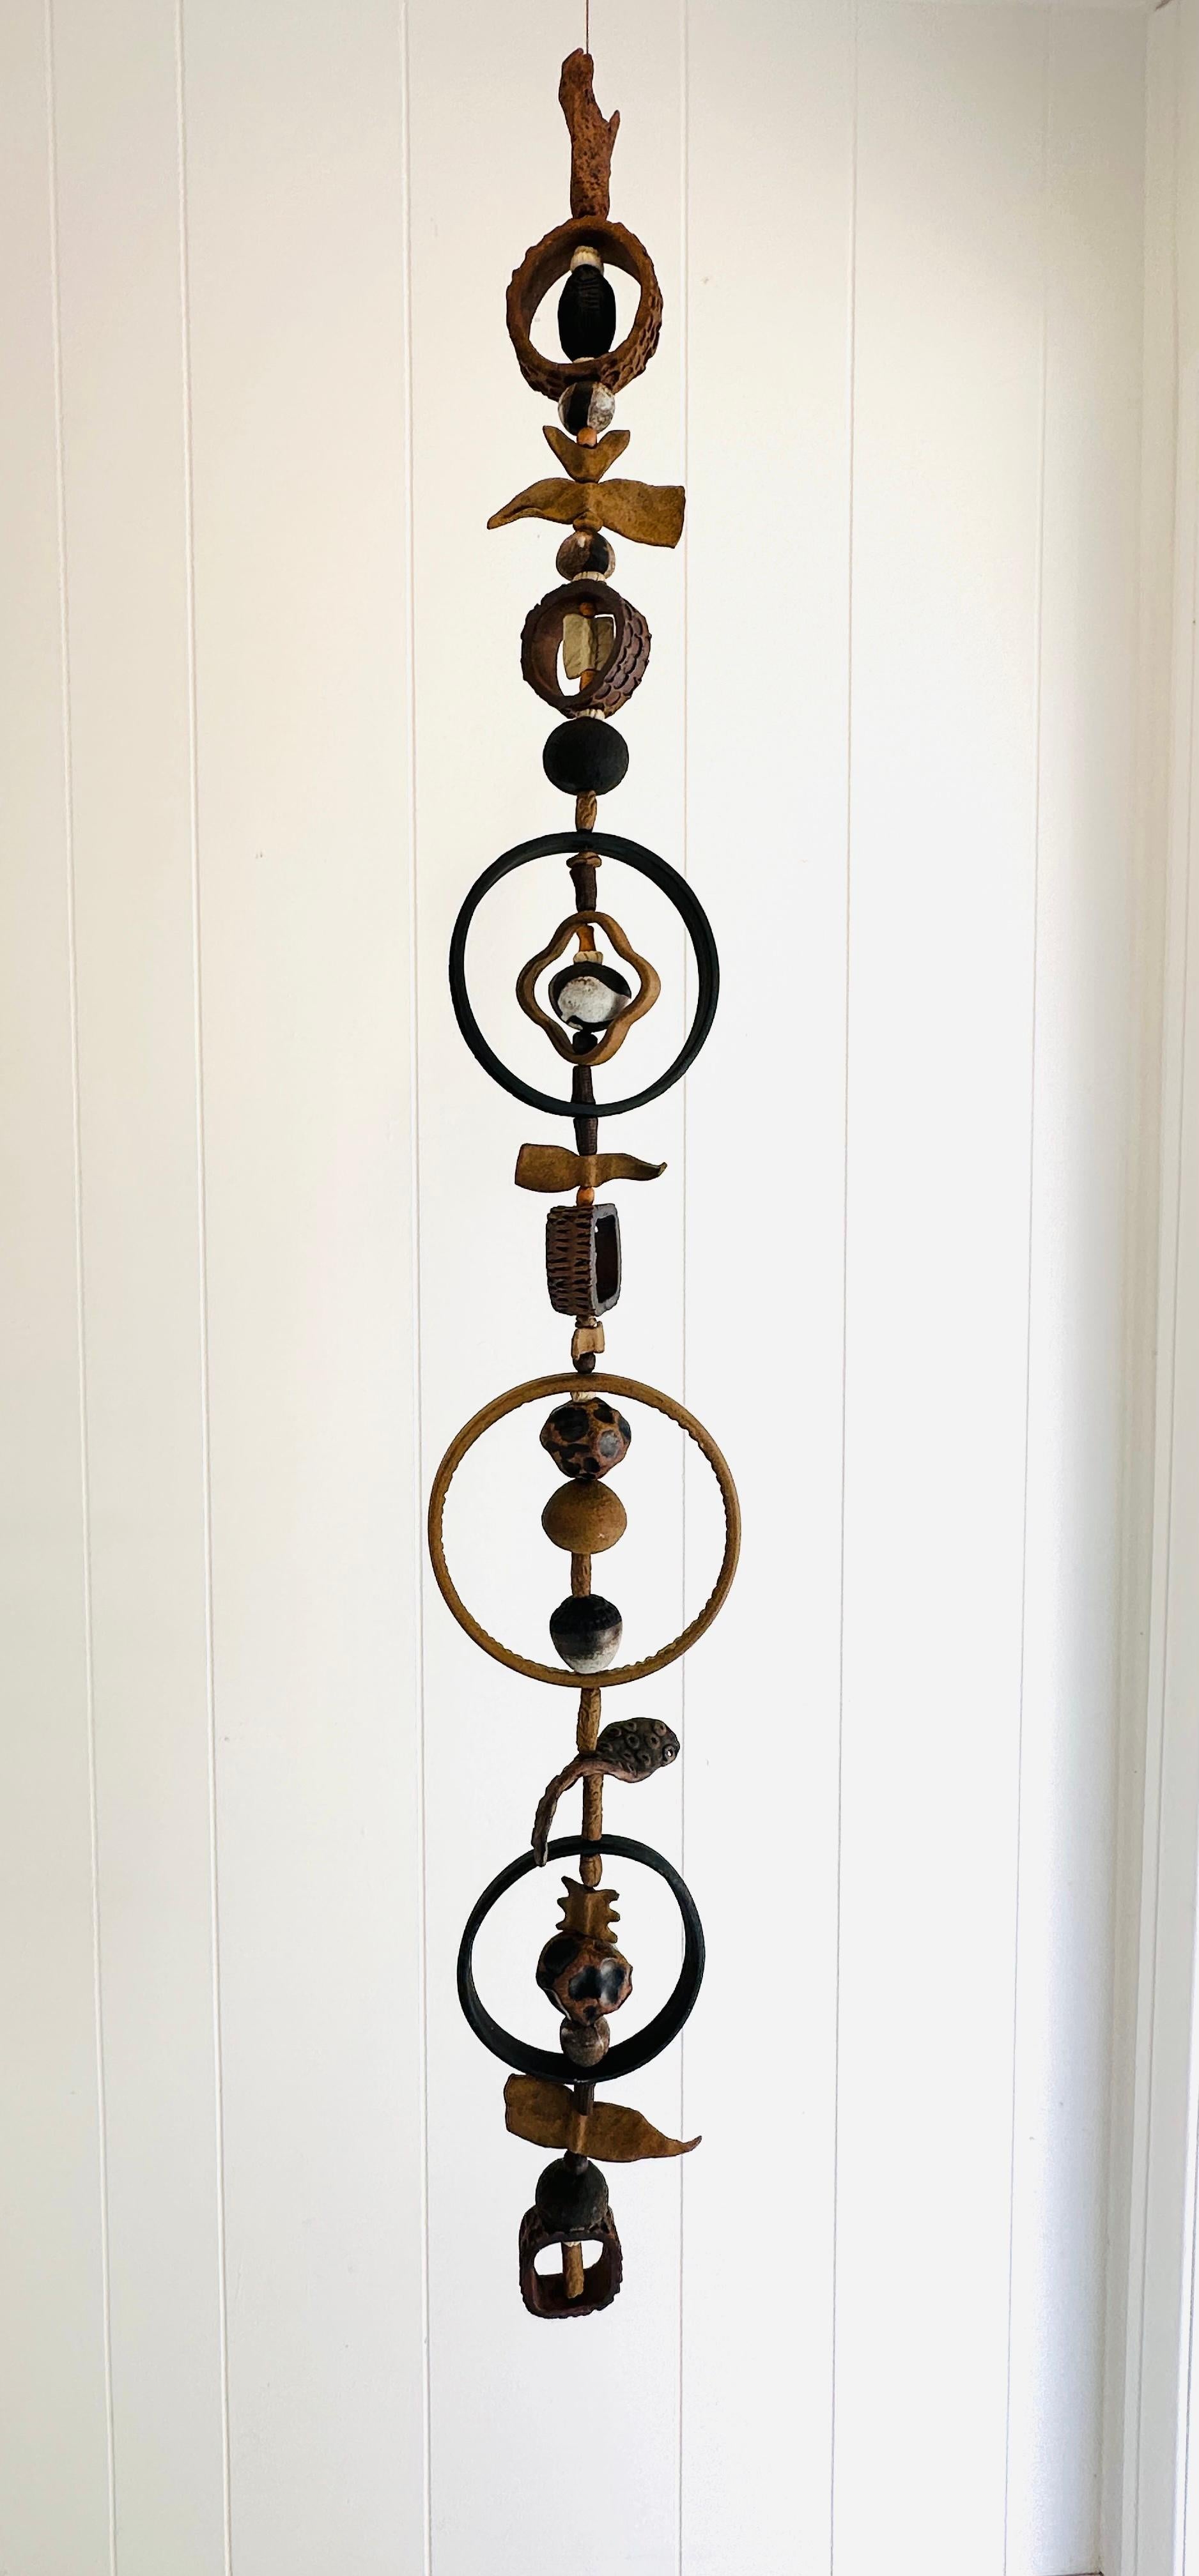 American Monumental Ceramic Kinetic hanging sculpture hand crafted by Brenda Williams For Sale